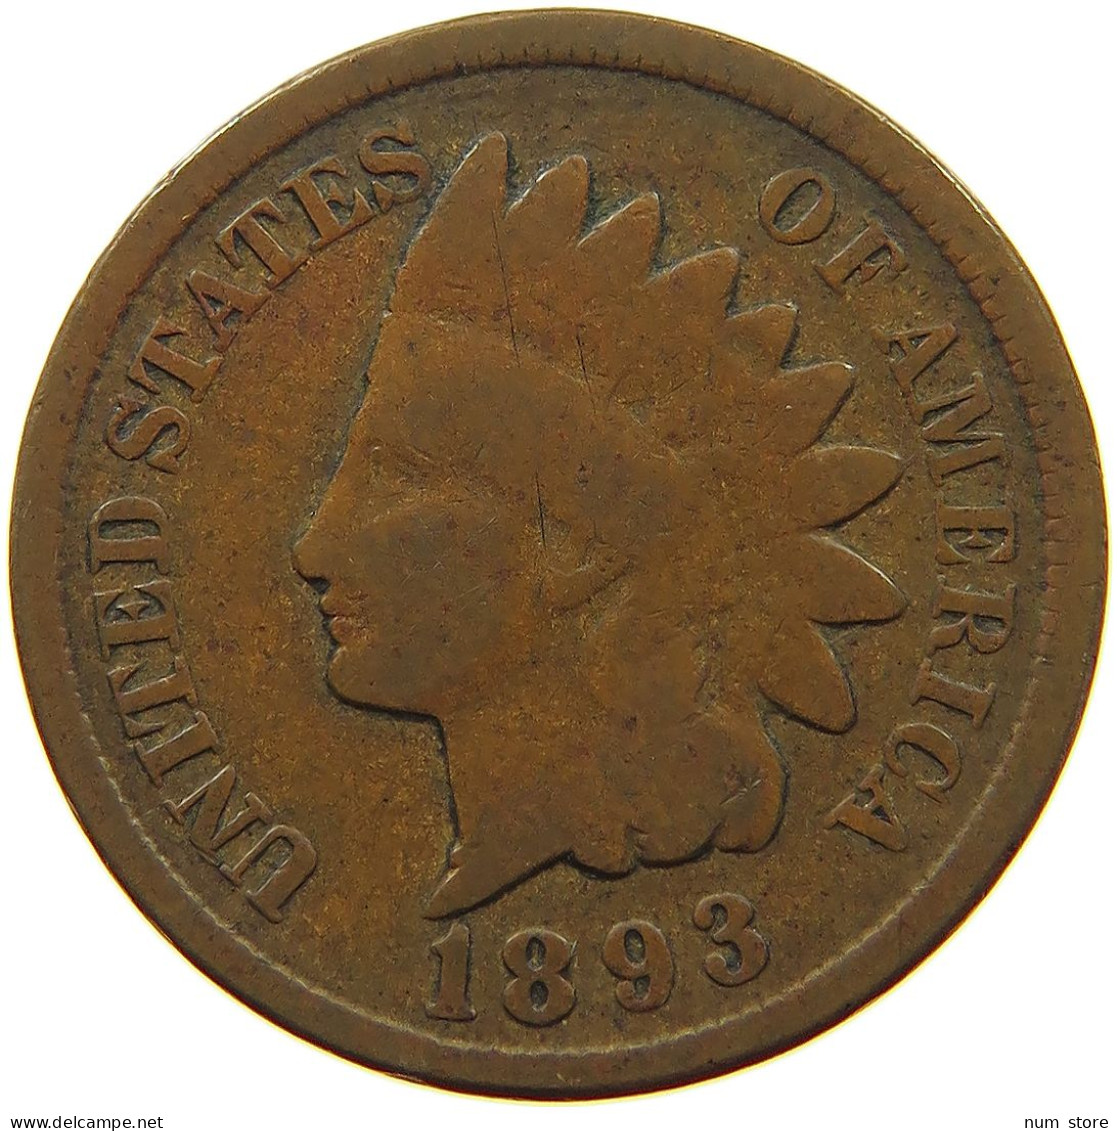 UNITED STATES OF AMERICA CENT 1893 INDIAN HEAD #s063 0413 - 1859-1909: Indian Head